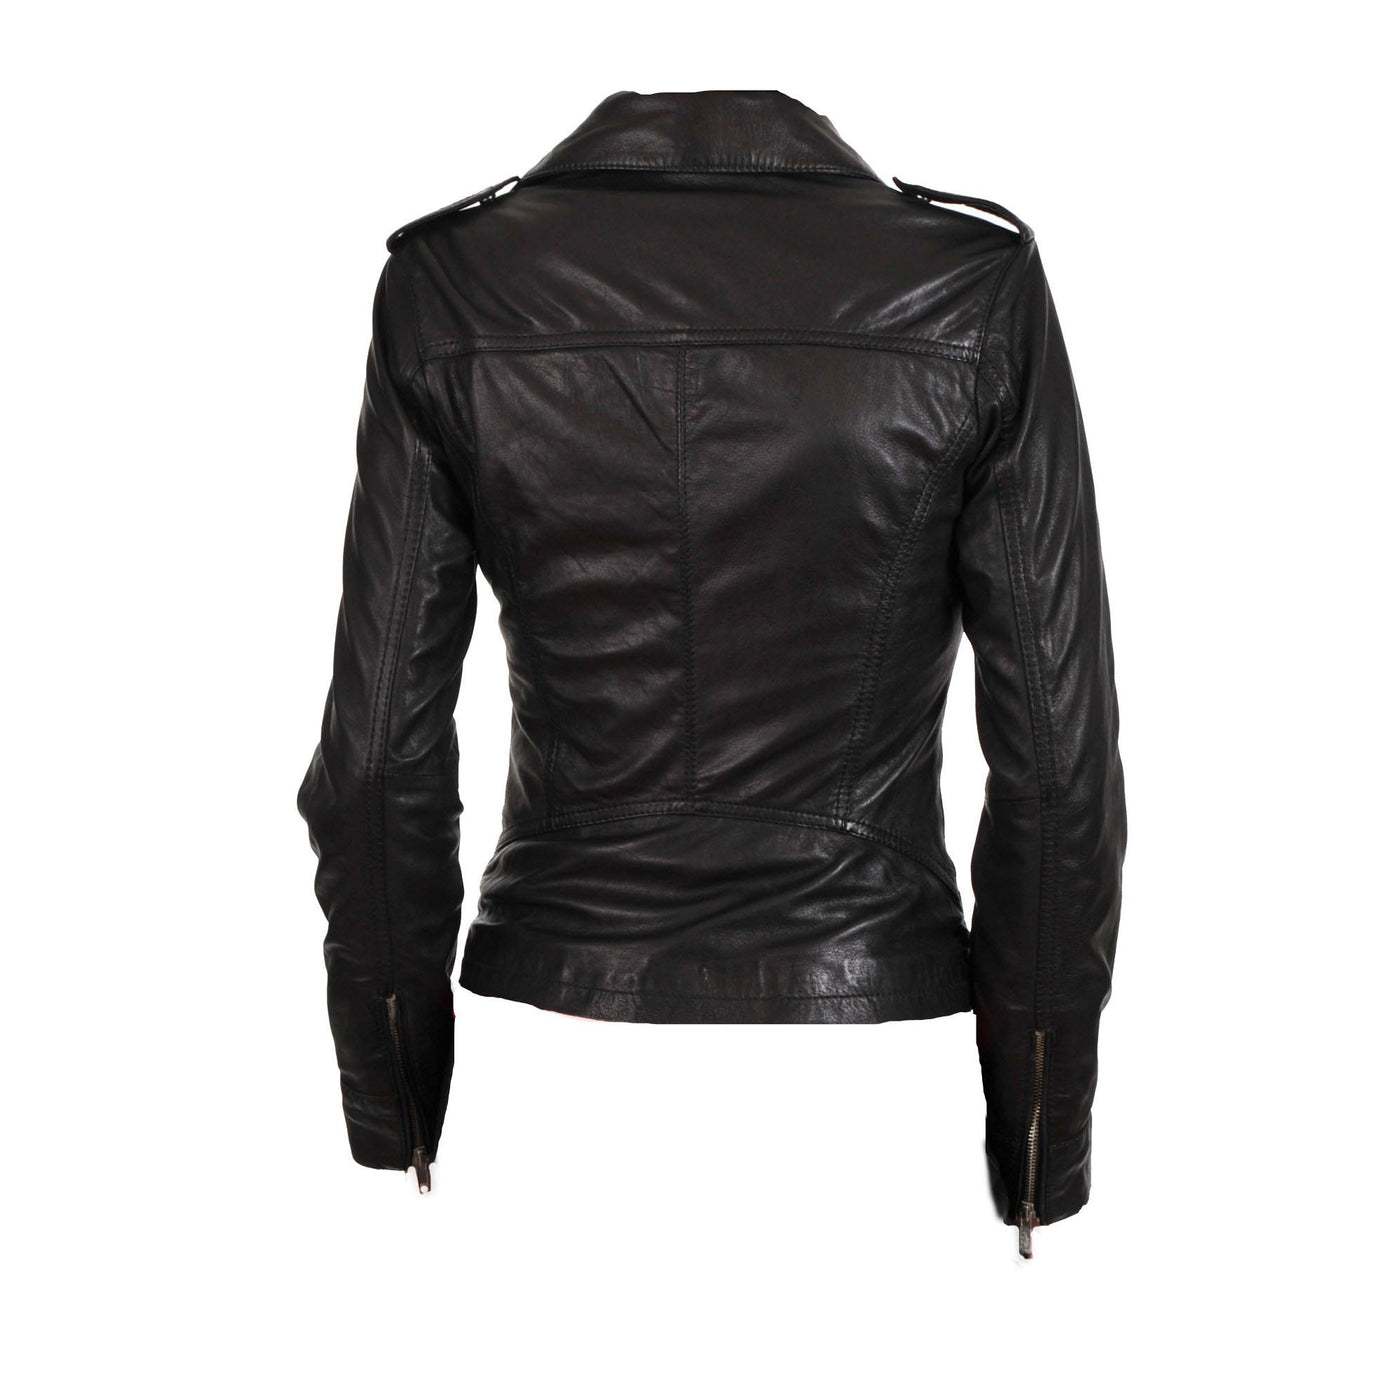 Women's classic biker style leather jacket - Lusso Leather - 2